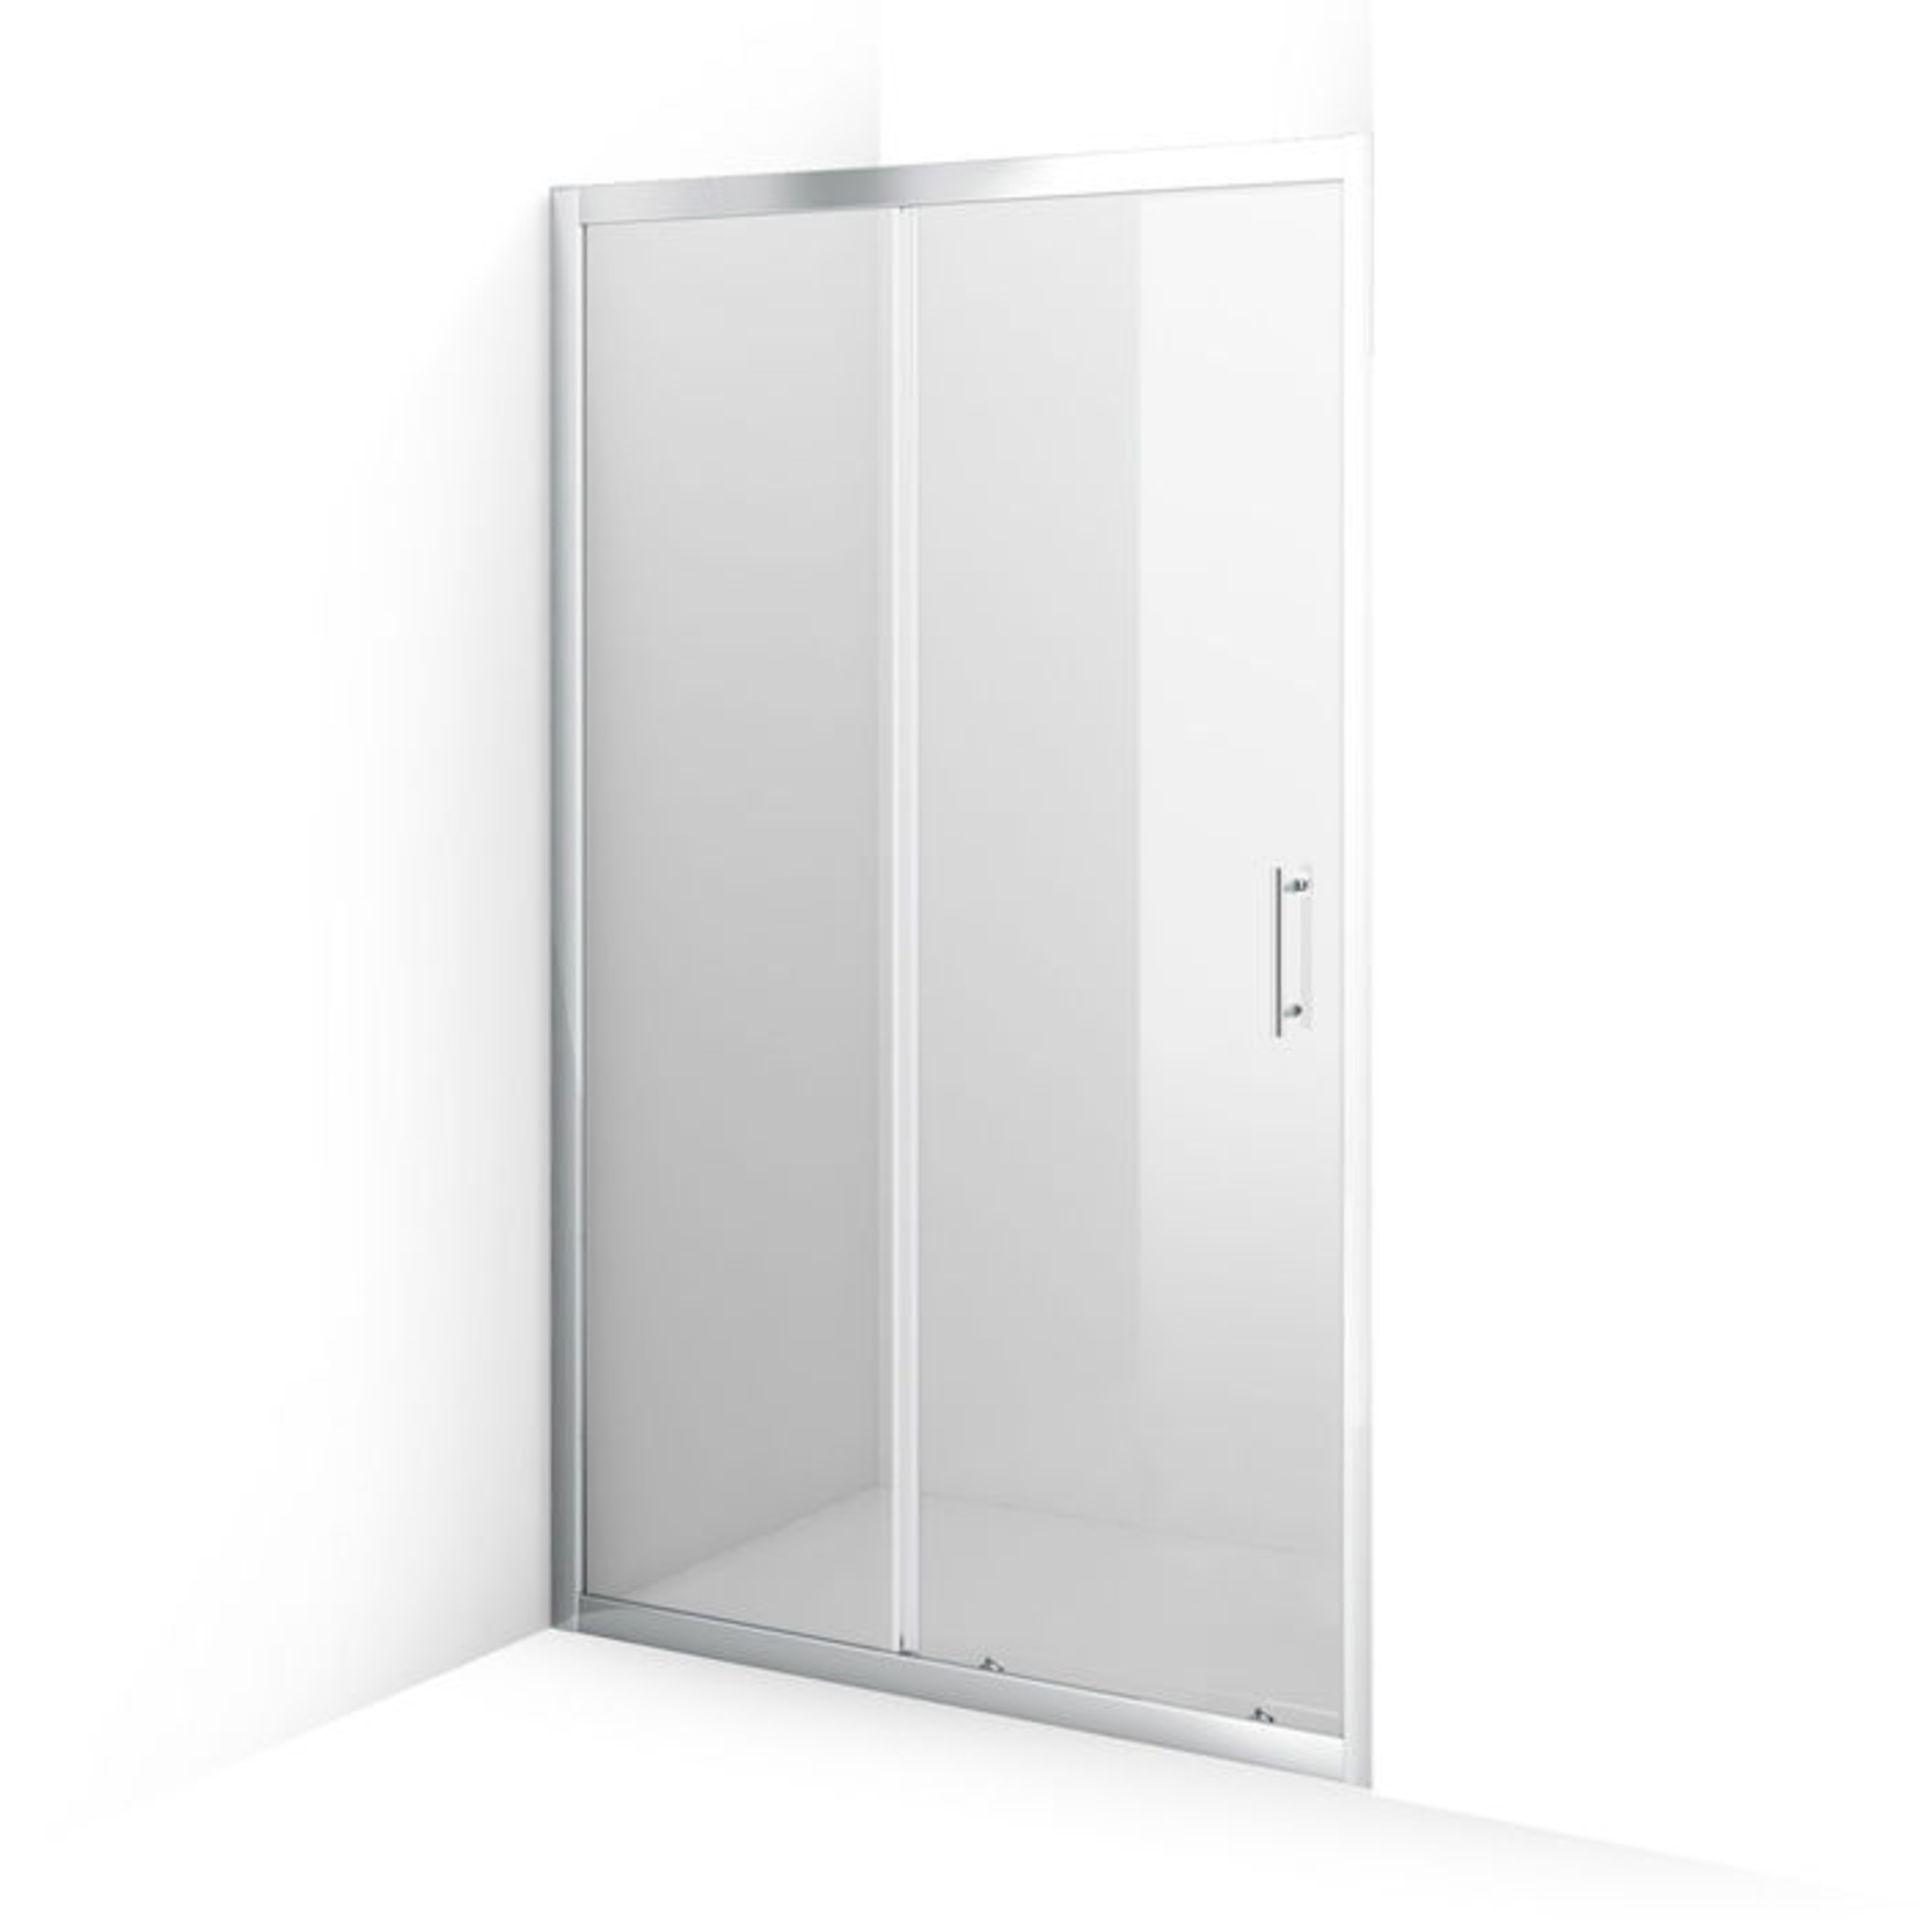 (HS26) 1200mm - 6mm - Elements Sliding Shower Door. RRP £299.99. 6mm Safety Glass Fully waterproof - Image 4 of 4